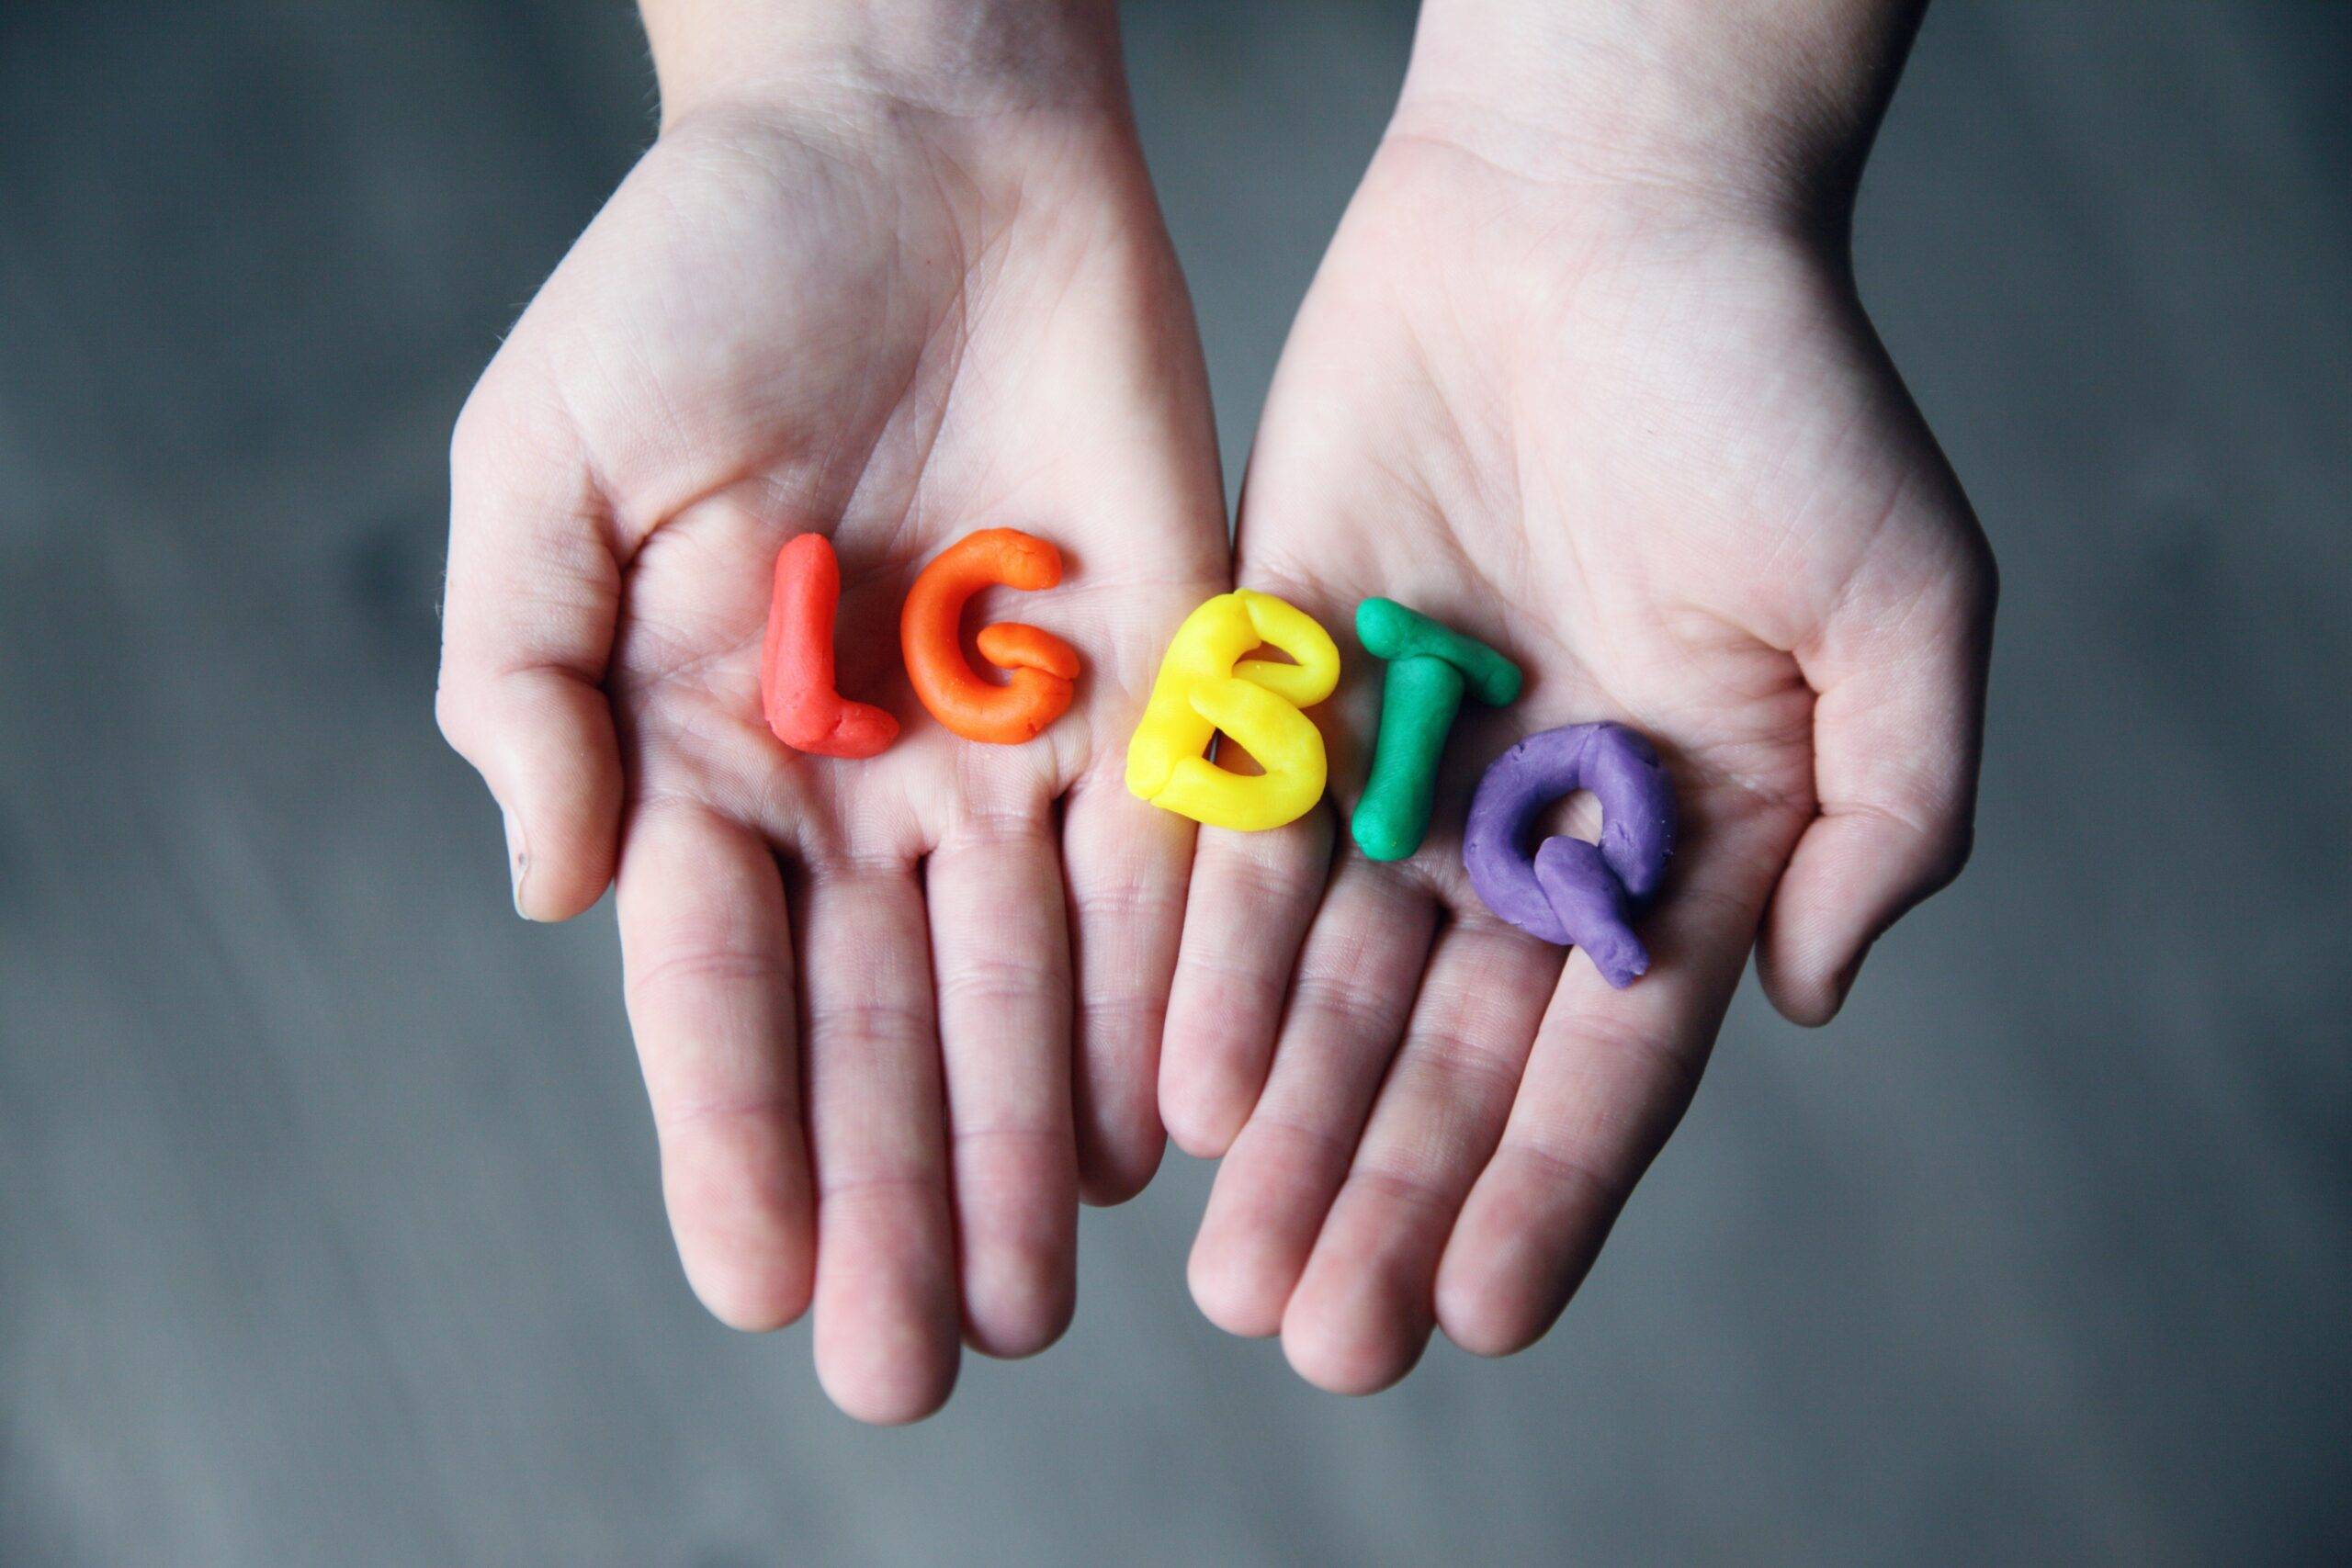 close-up-photo-of-lgbtq-letters-on-a-person-s-hands-1566842